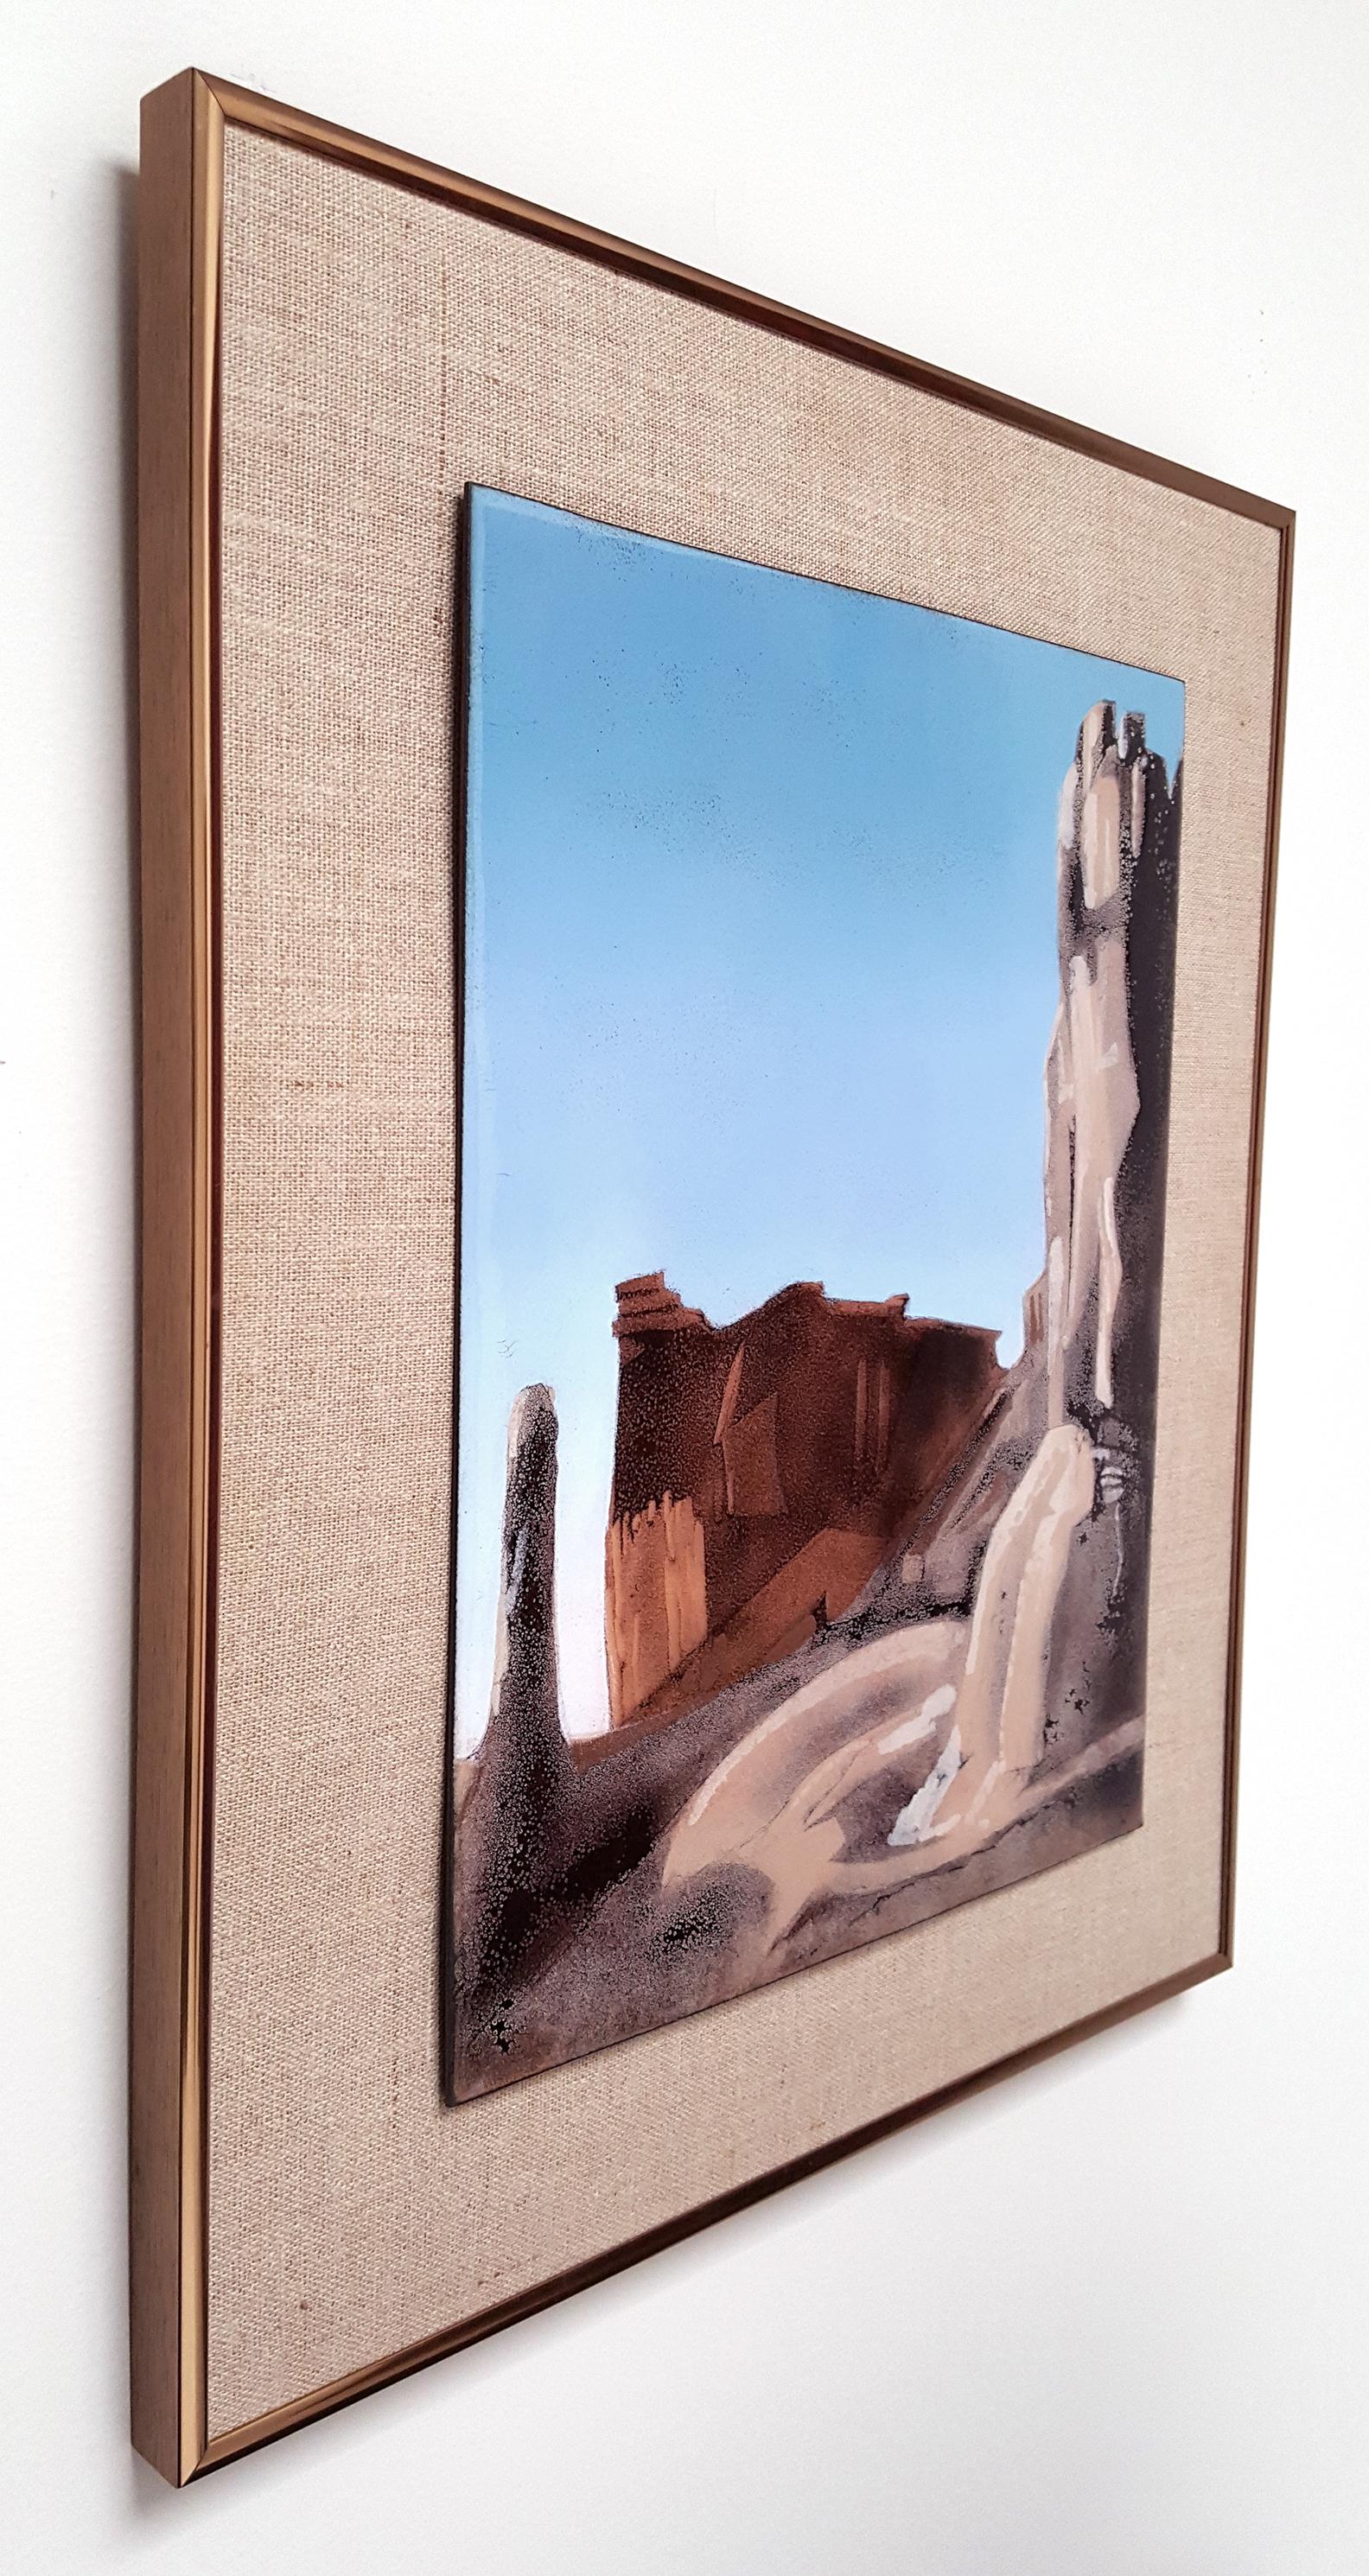 Mid-Century Modern 'Capitol Reef' by Irwin Whitaker For Sale